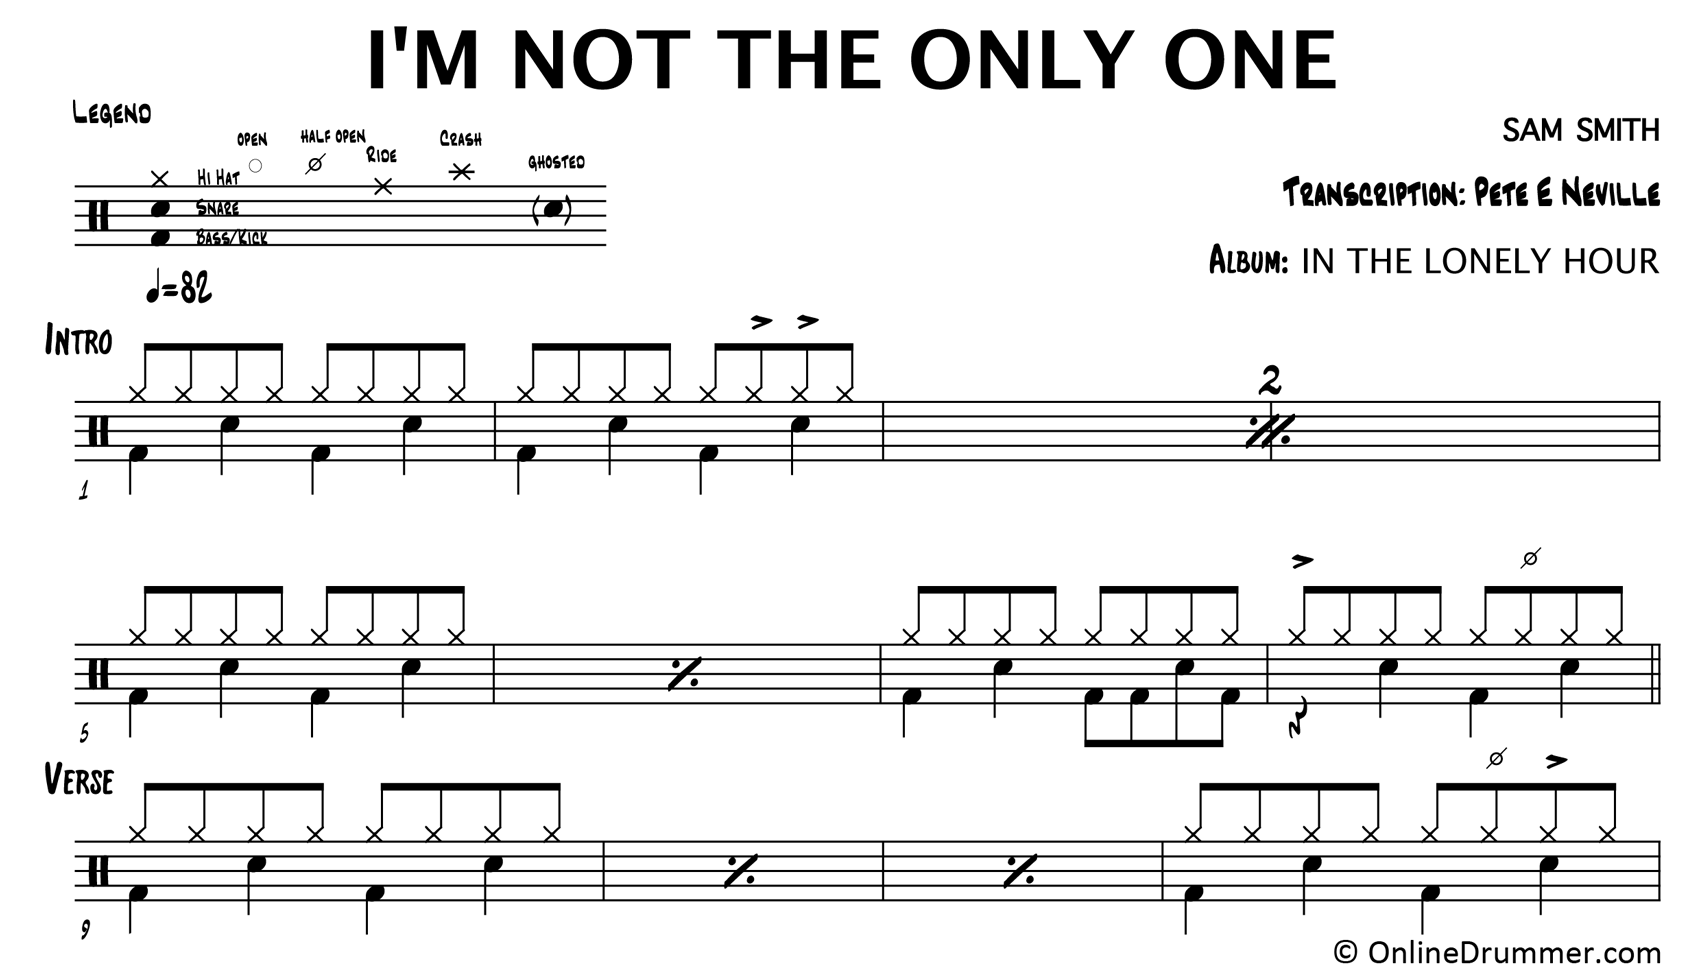 I'm Not The Only One - Sam Smith - Drum Sheet Music